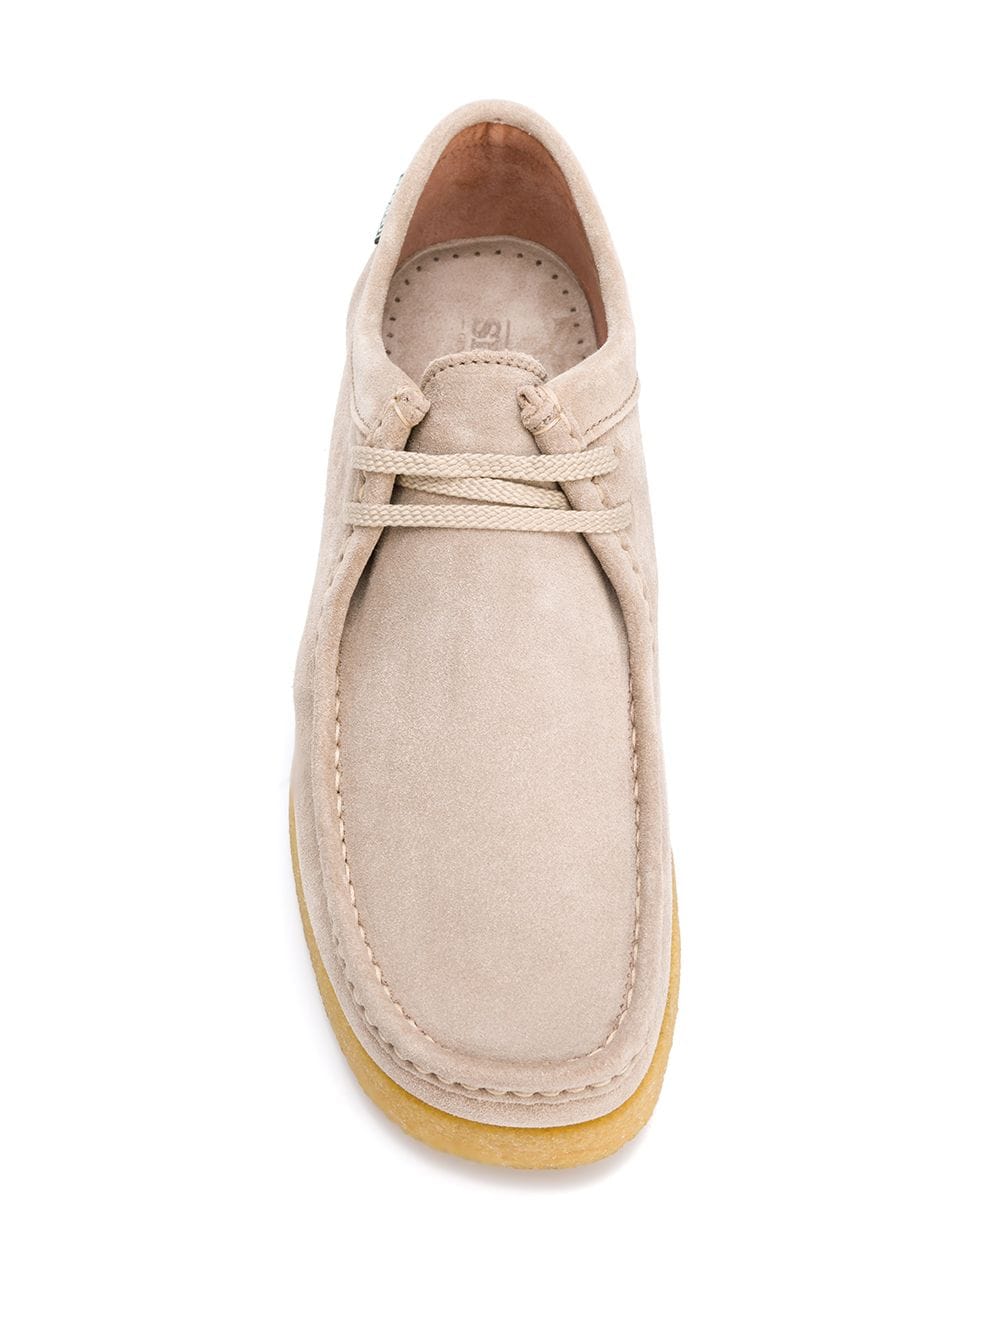 Shop Sebago suede laced loafers with Express Delivery - FARFETCH